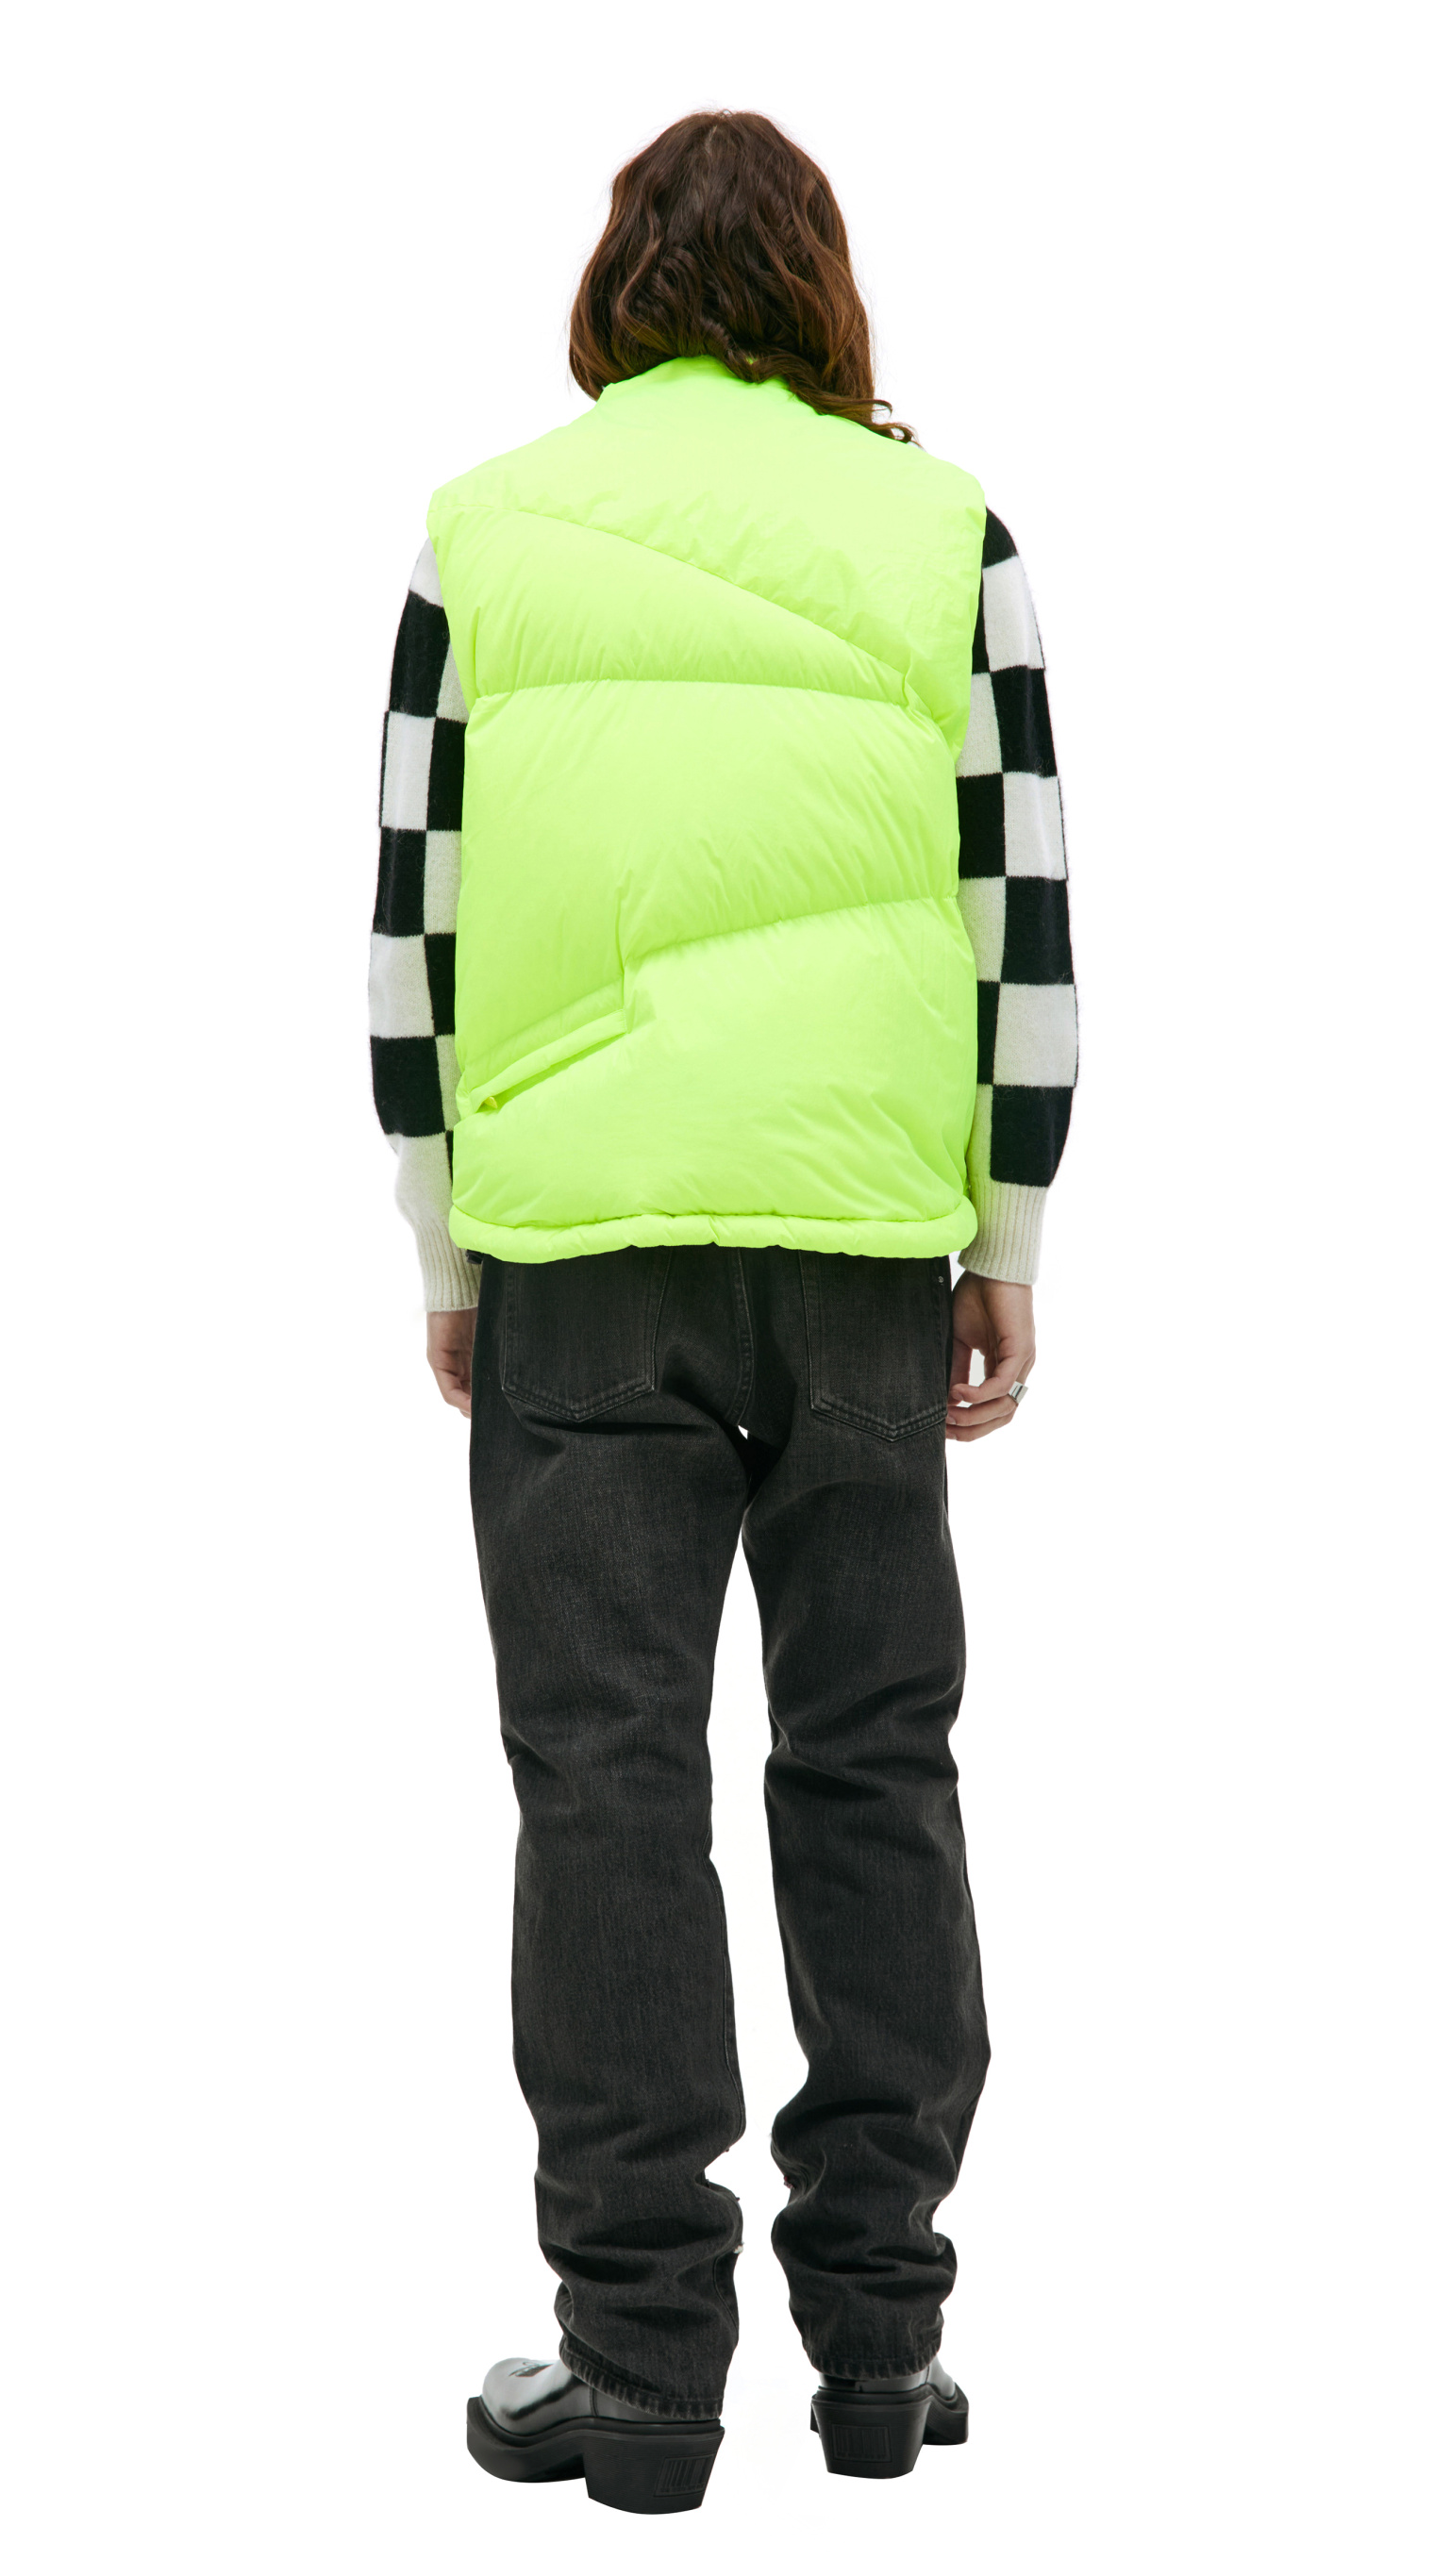 Undercover Quilted nylon vest